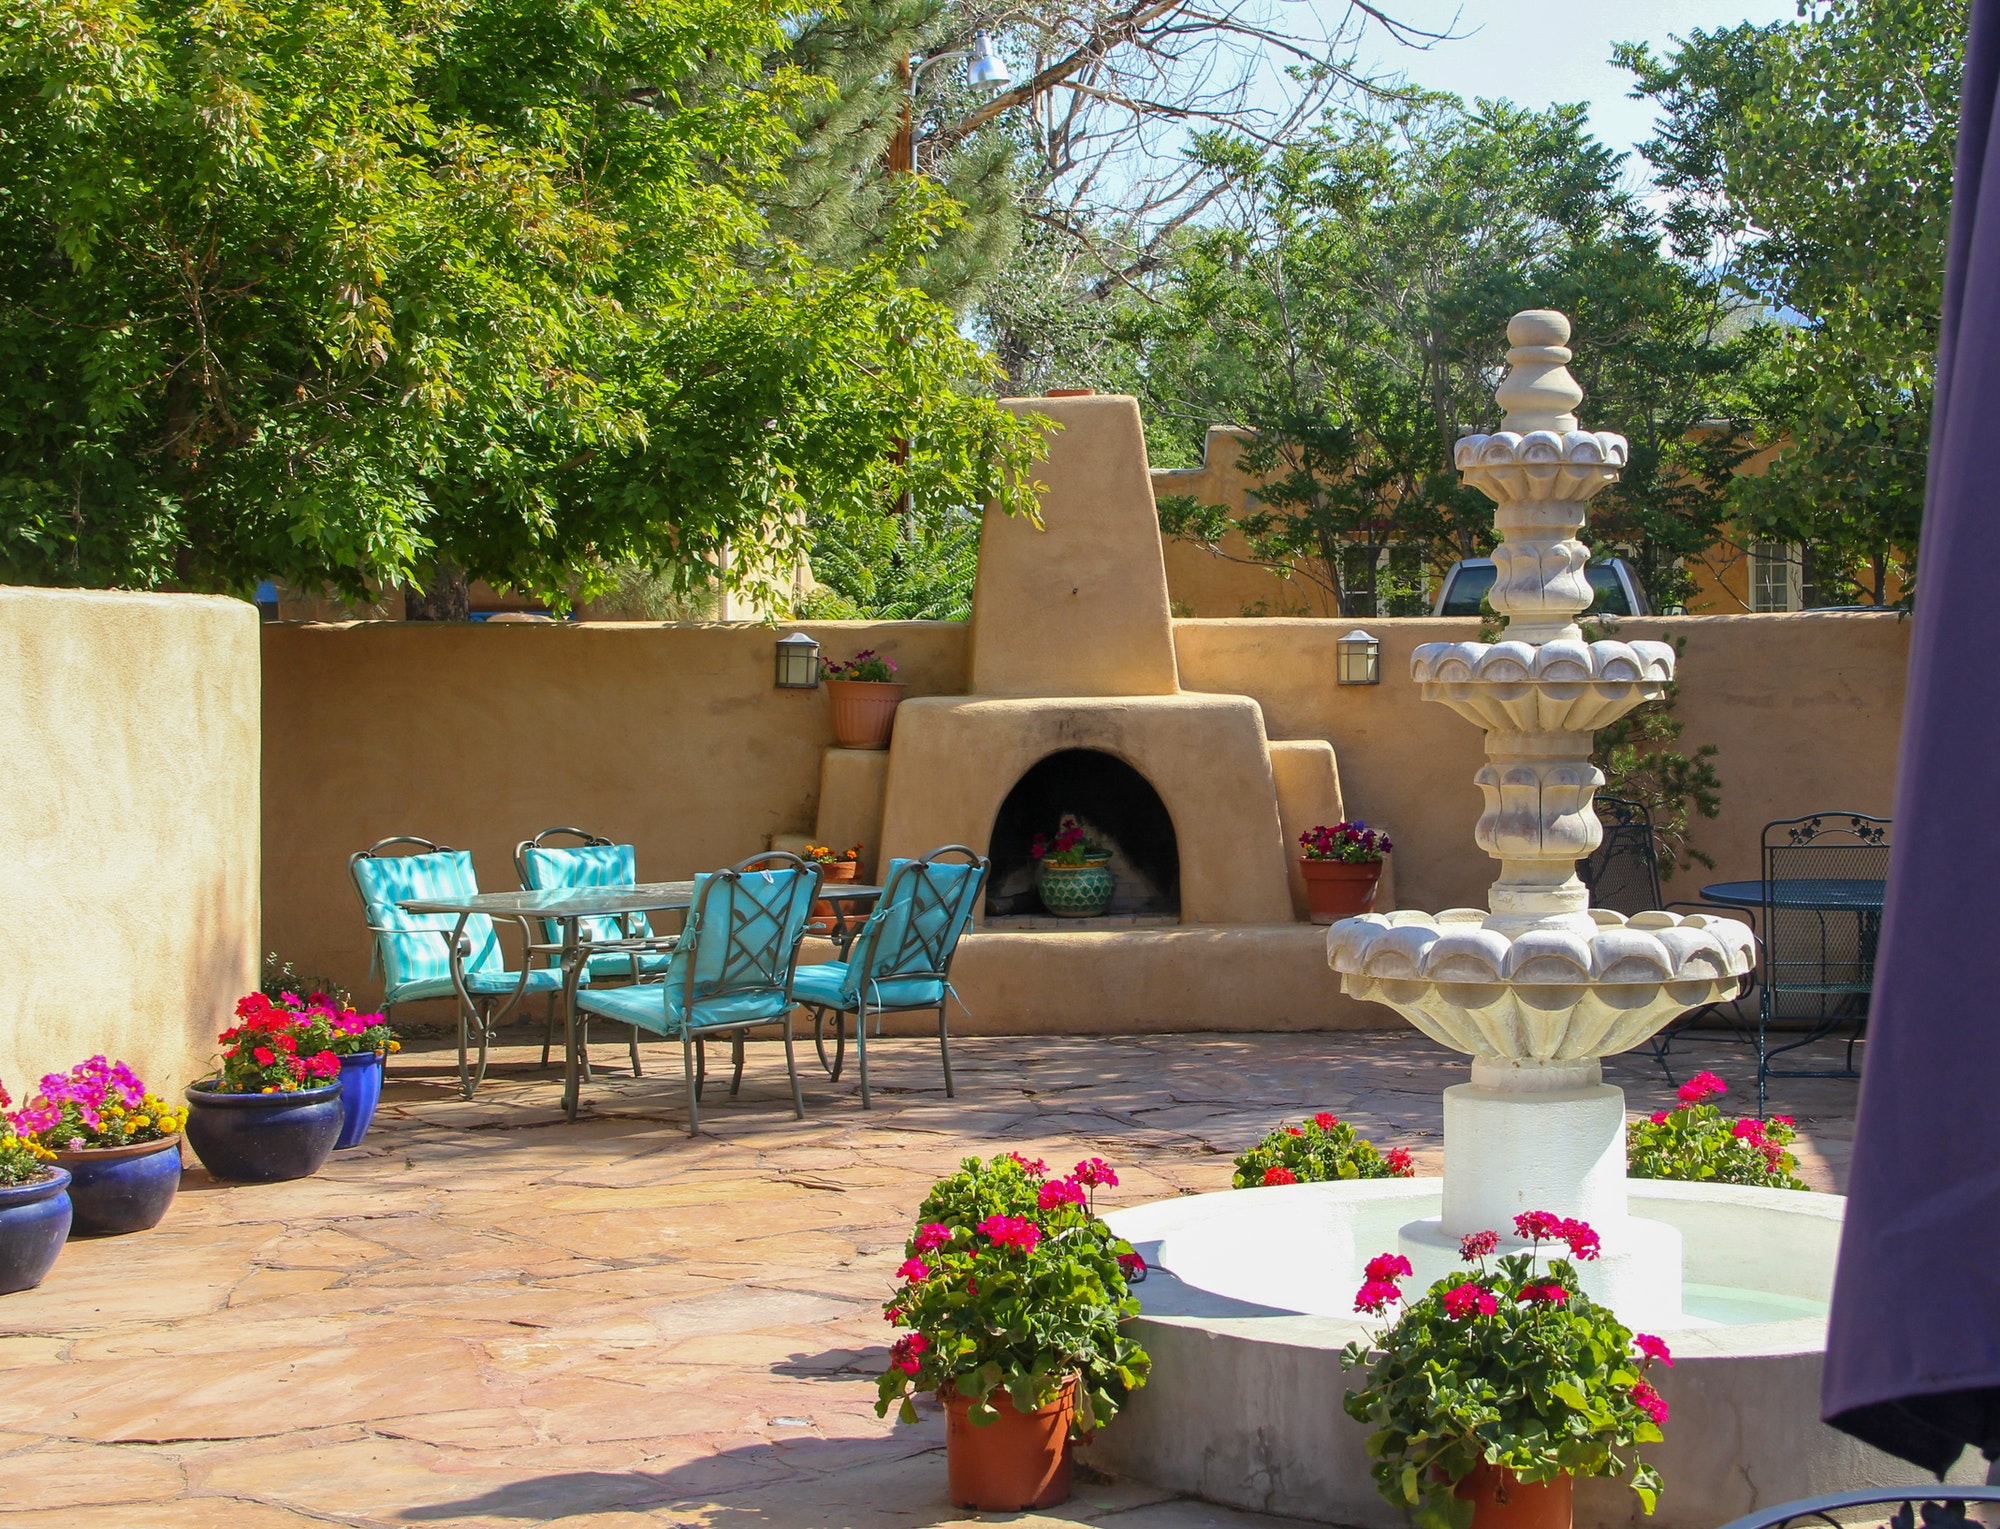 Beautiful traditional Taos New Mexico home back patio with flowers, fountain & colorful furniture